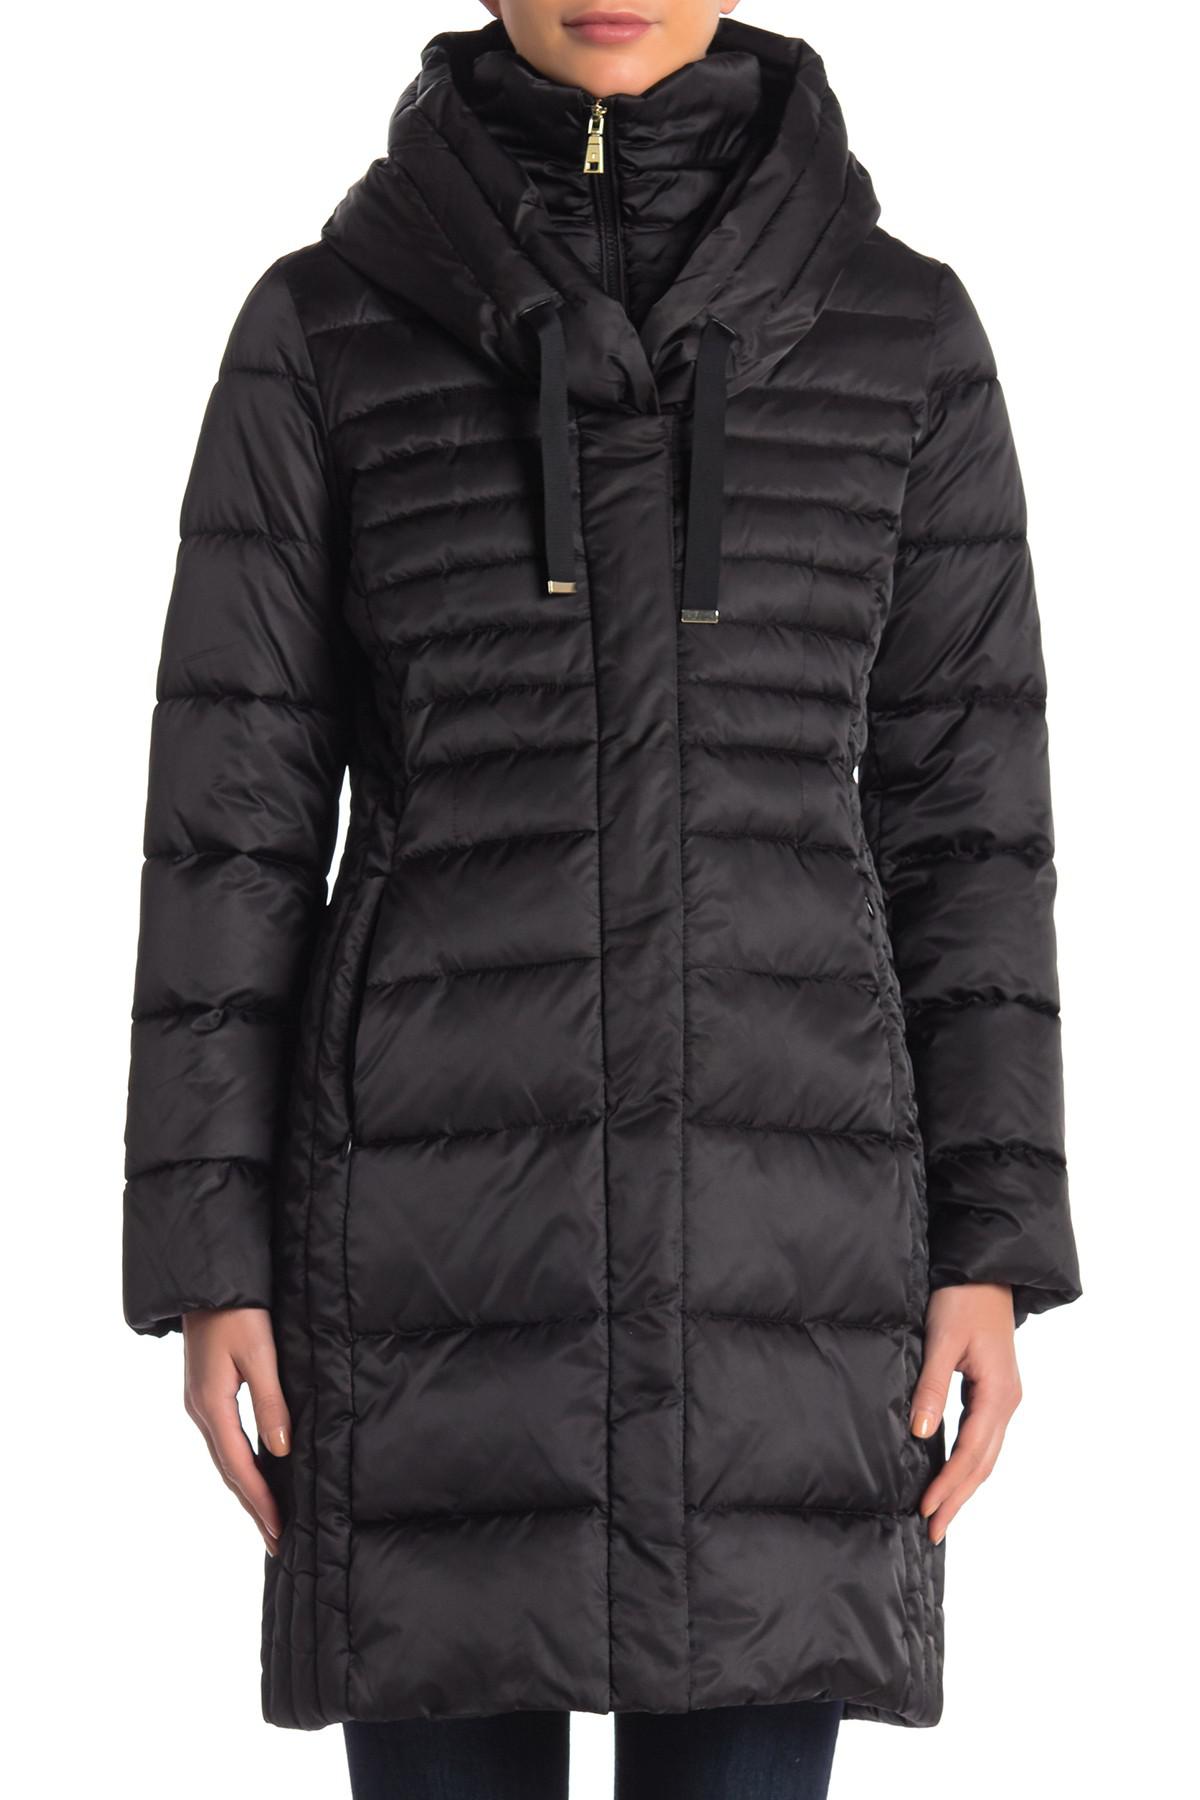 Tahari Synthetic Mia Fitted Puffer Coat in Black - Lyst